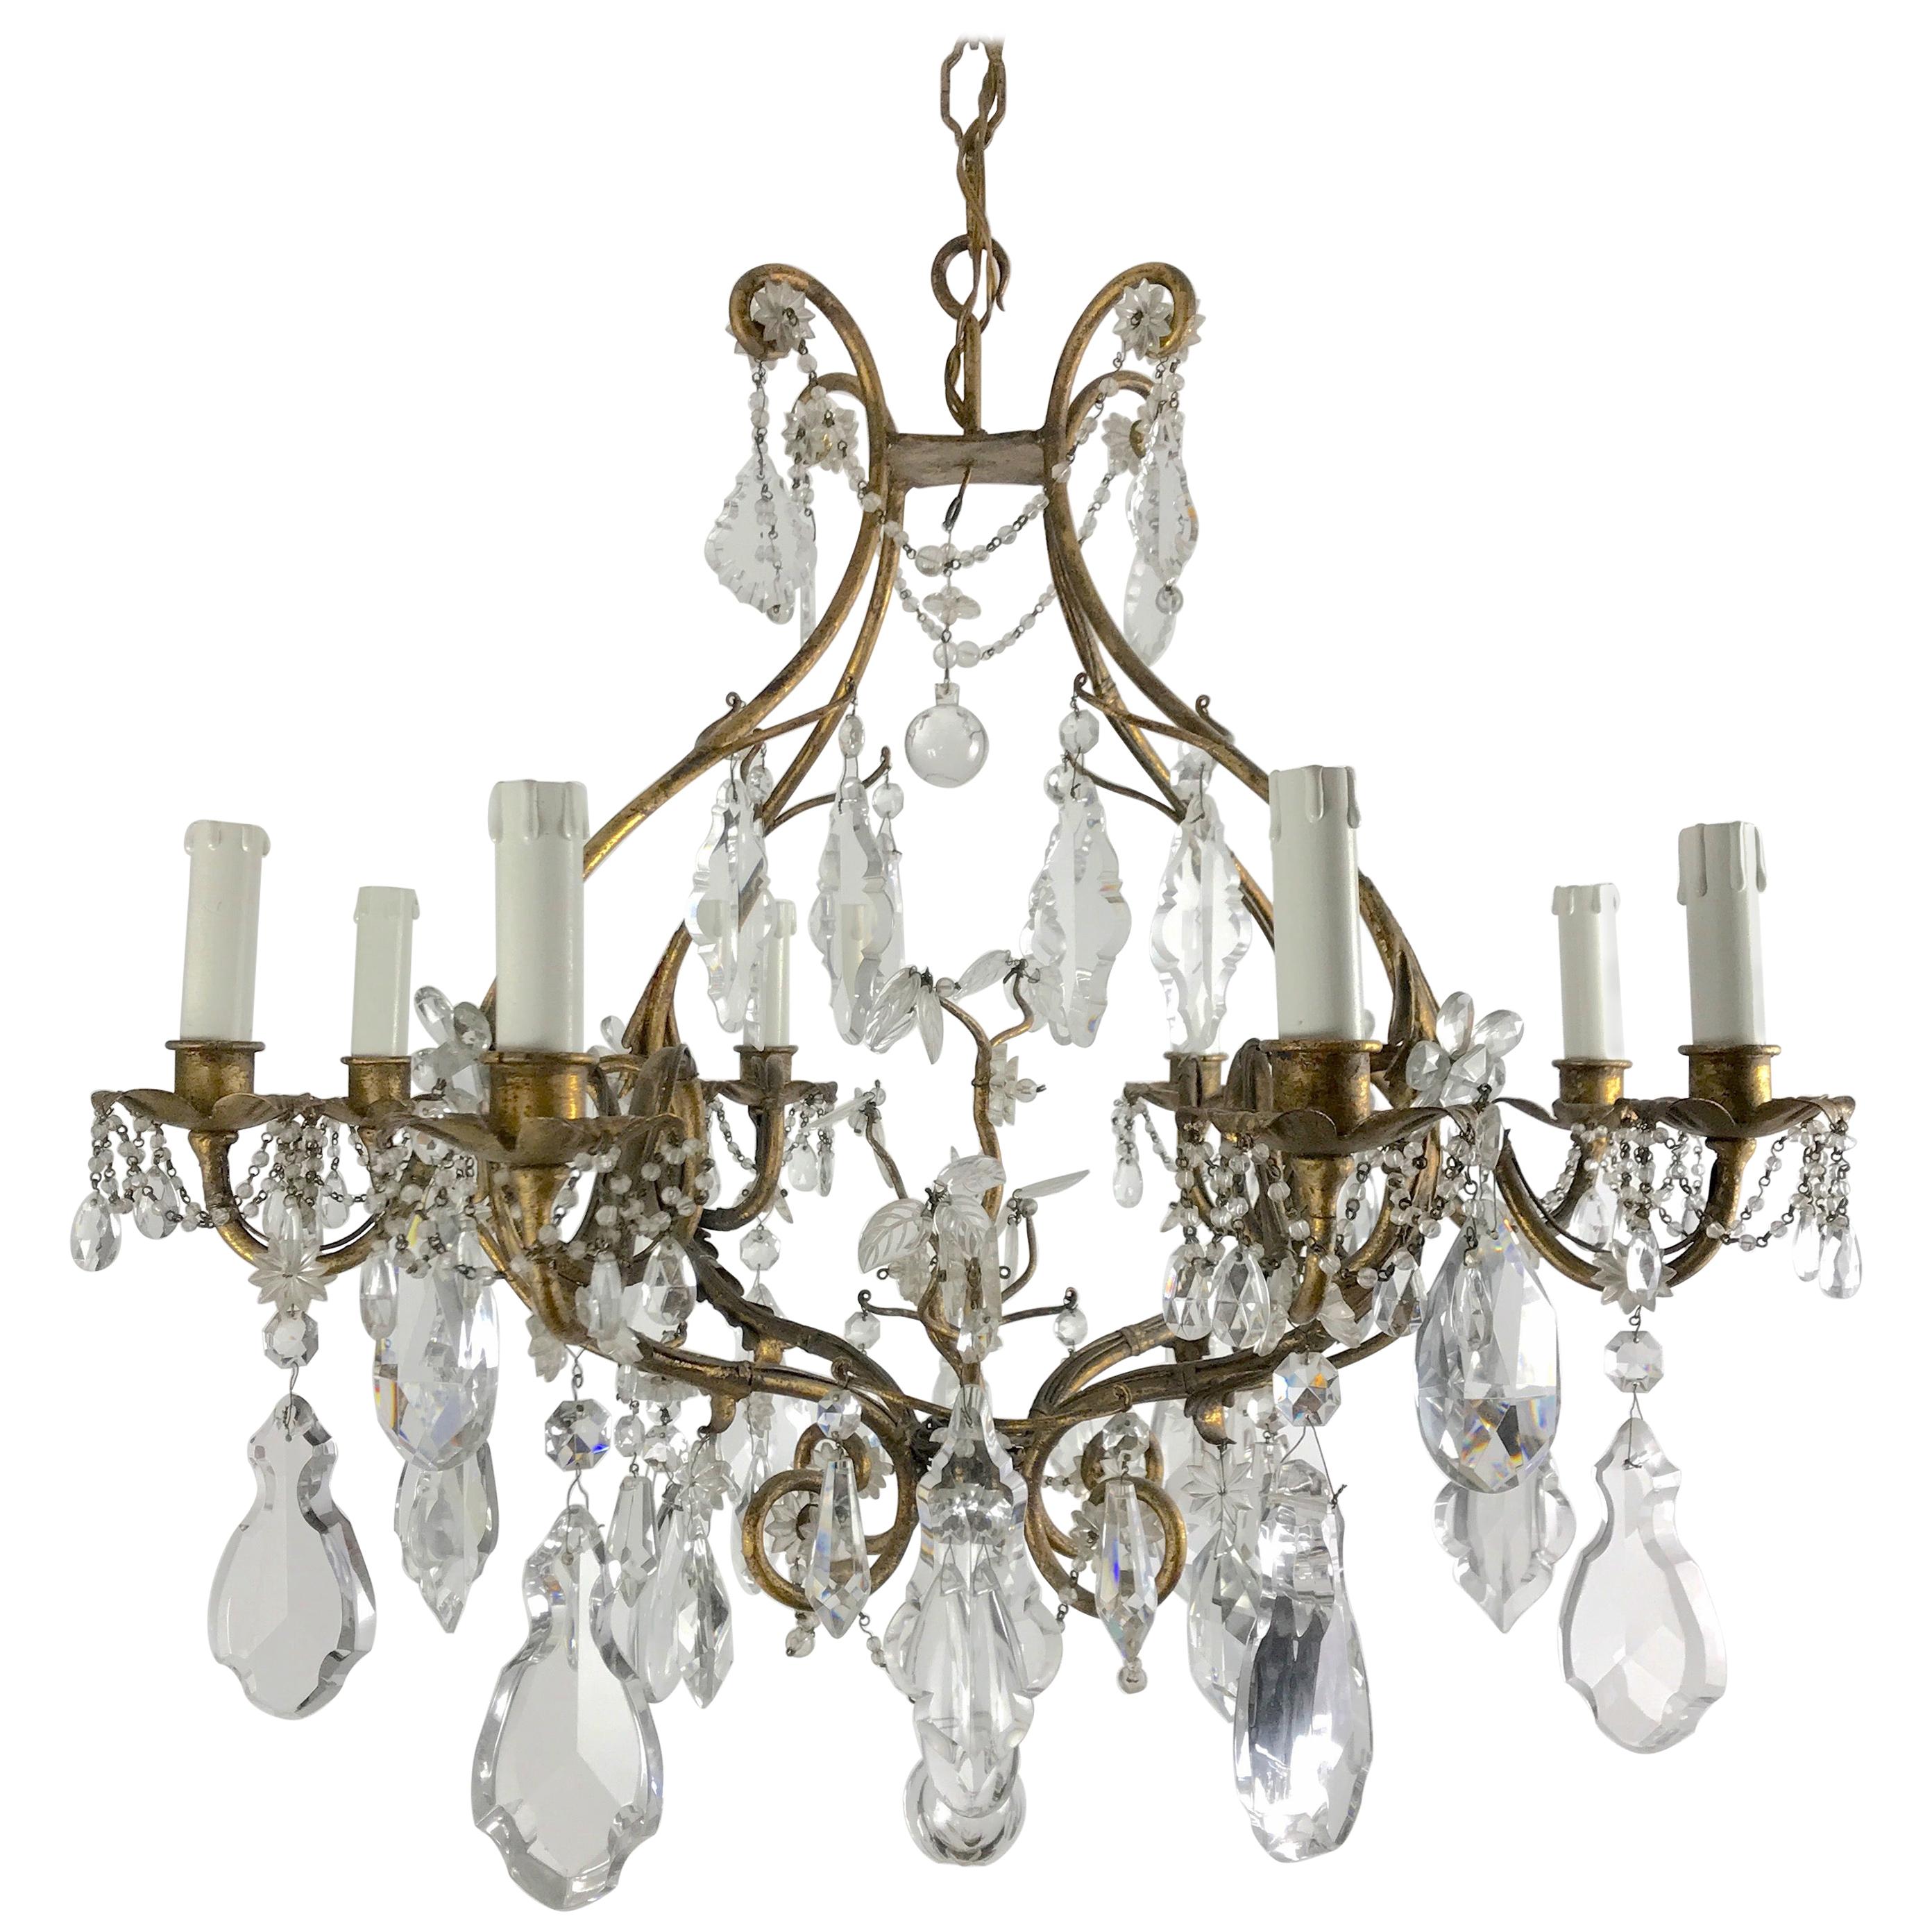 Mid-20th Century Italian Crystal Chandelier with Gilt-leaf Iron Cage Frame